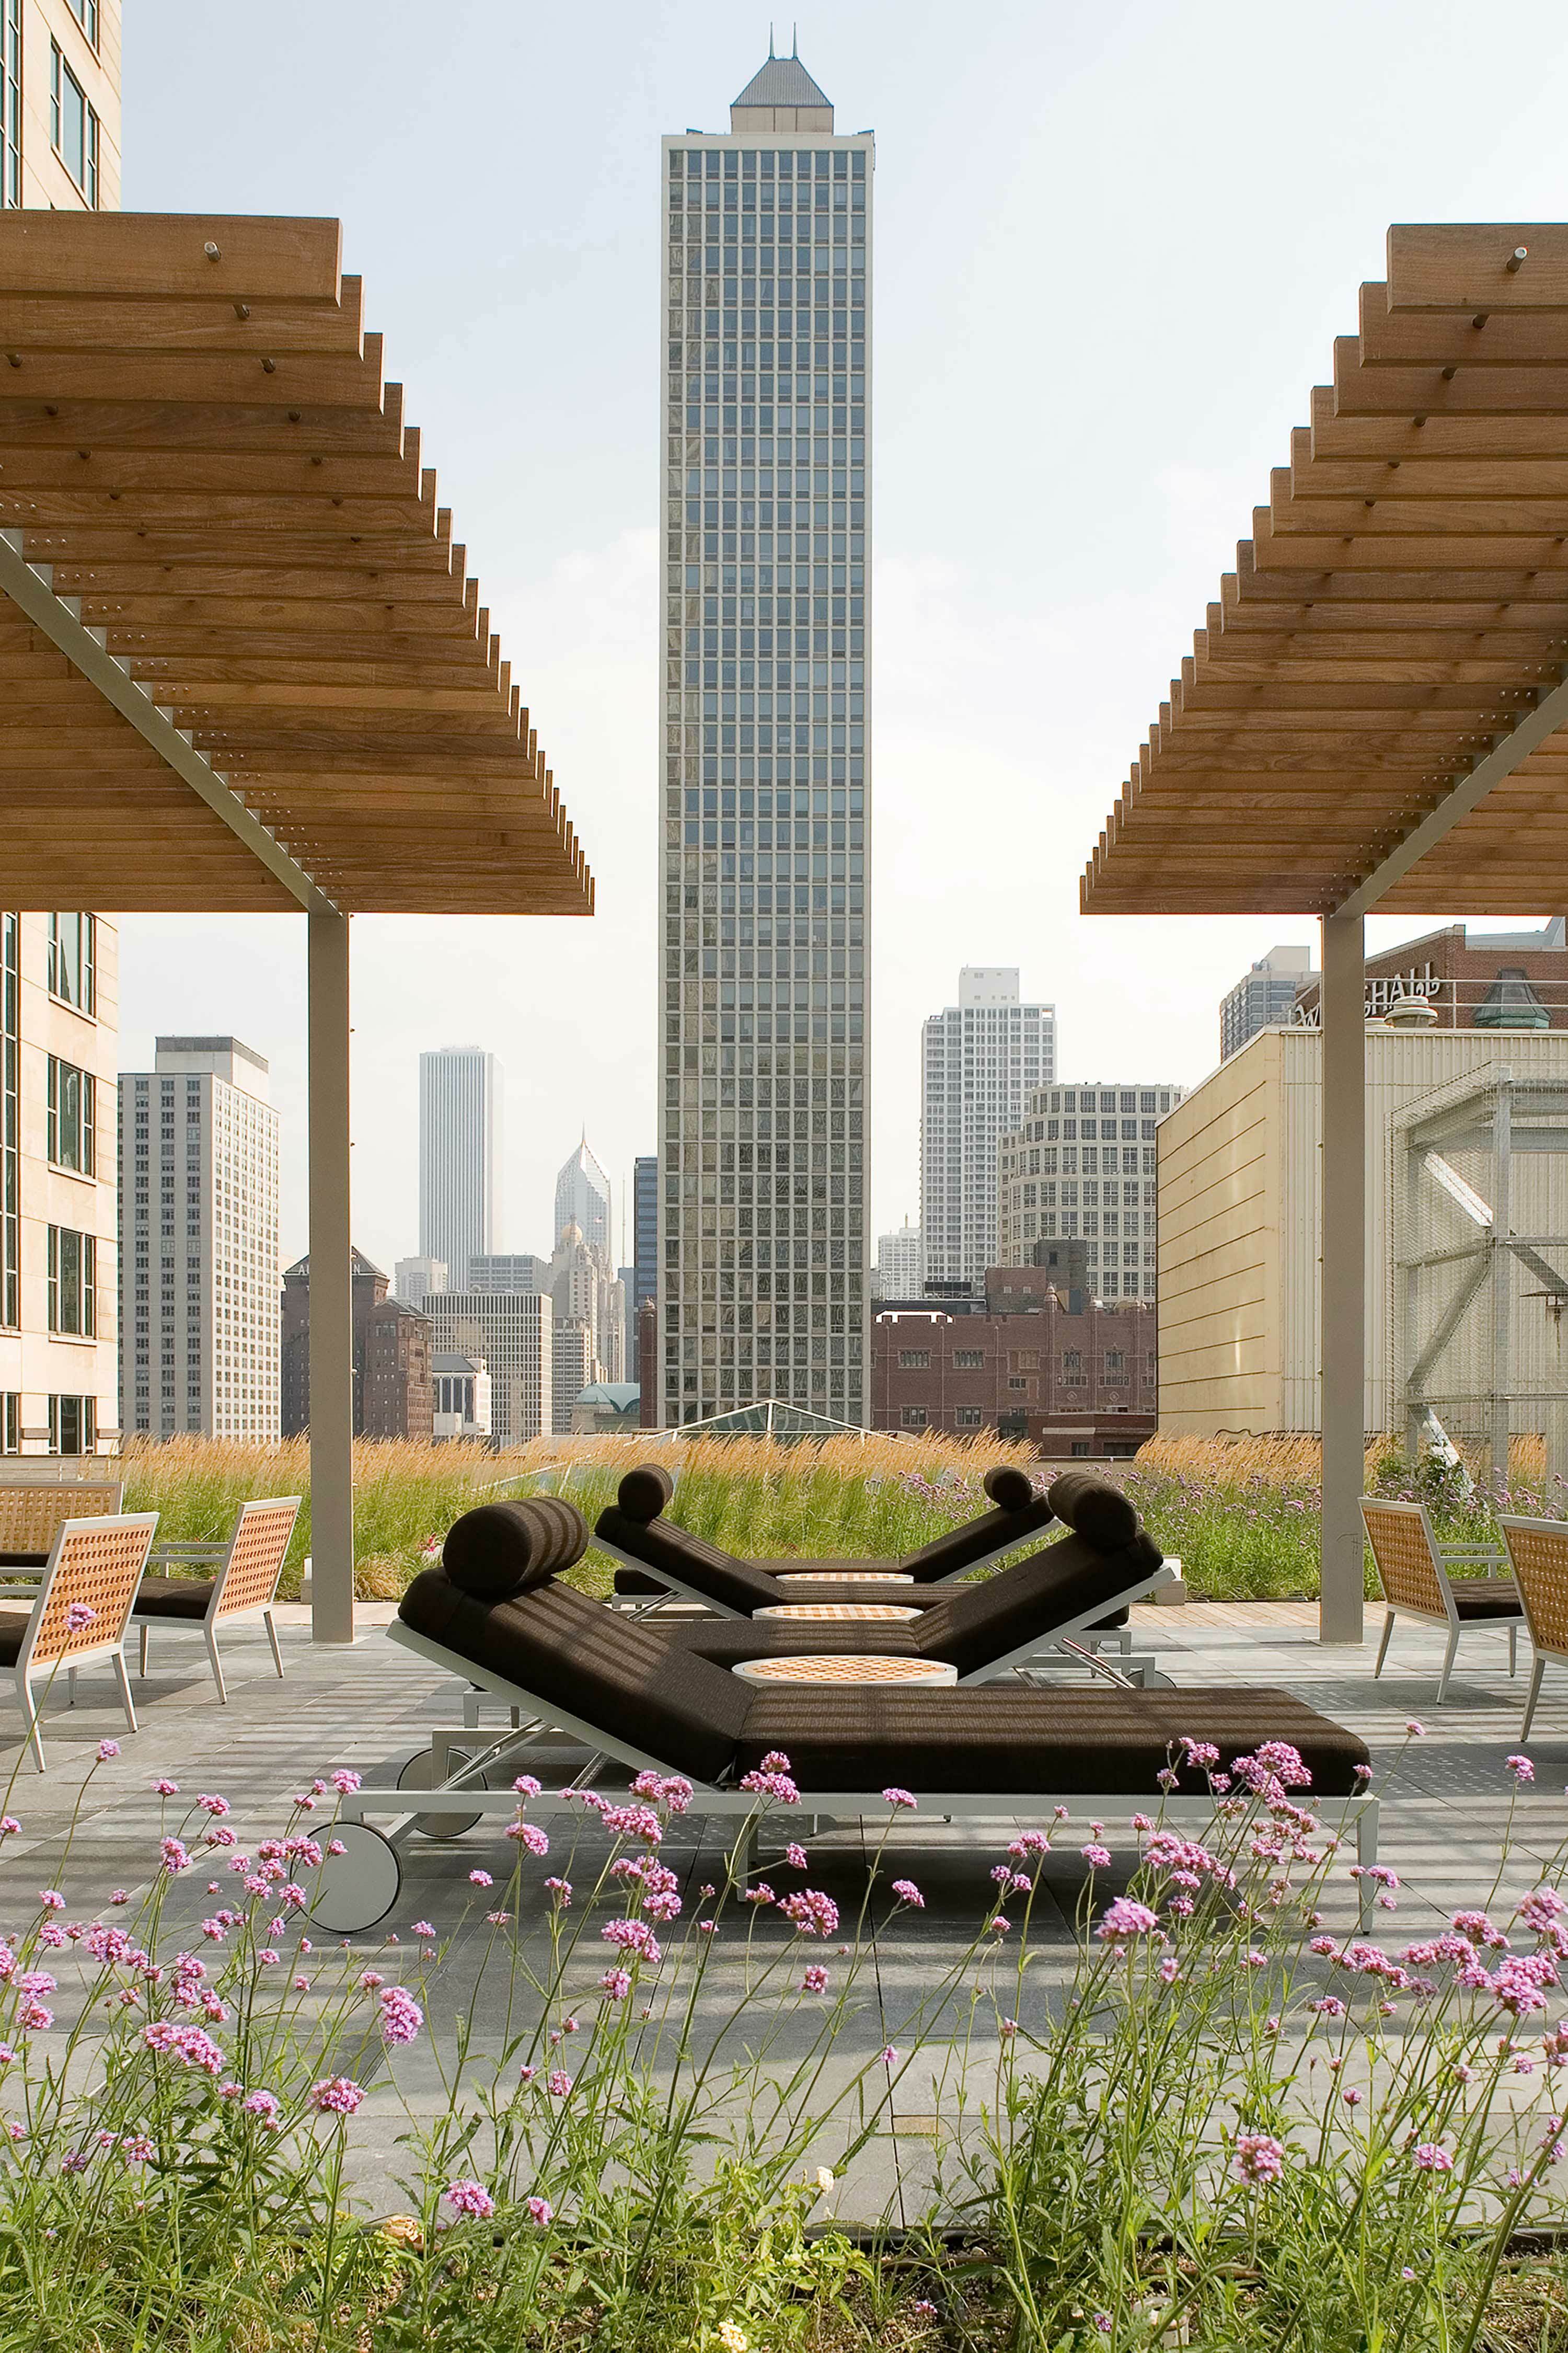 4 B lounge chairs patio building 900 nmichiganave rooftop hoerrschaudt